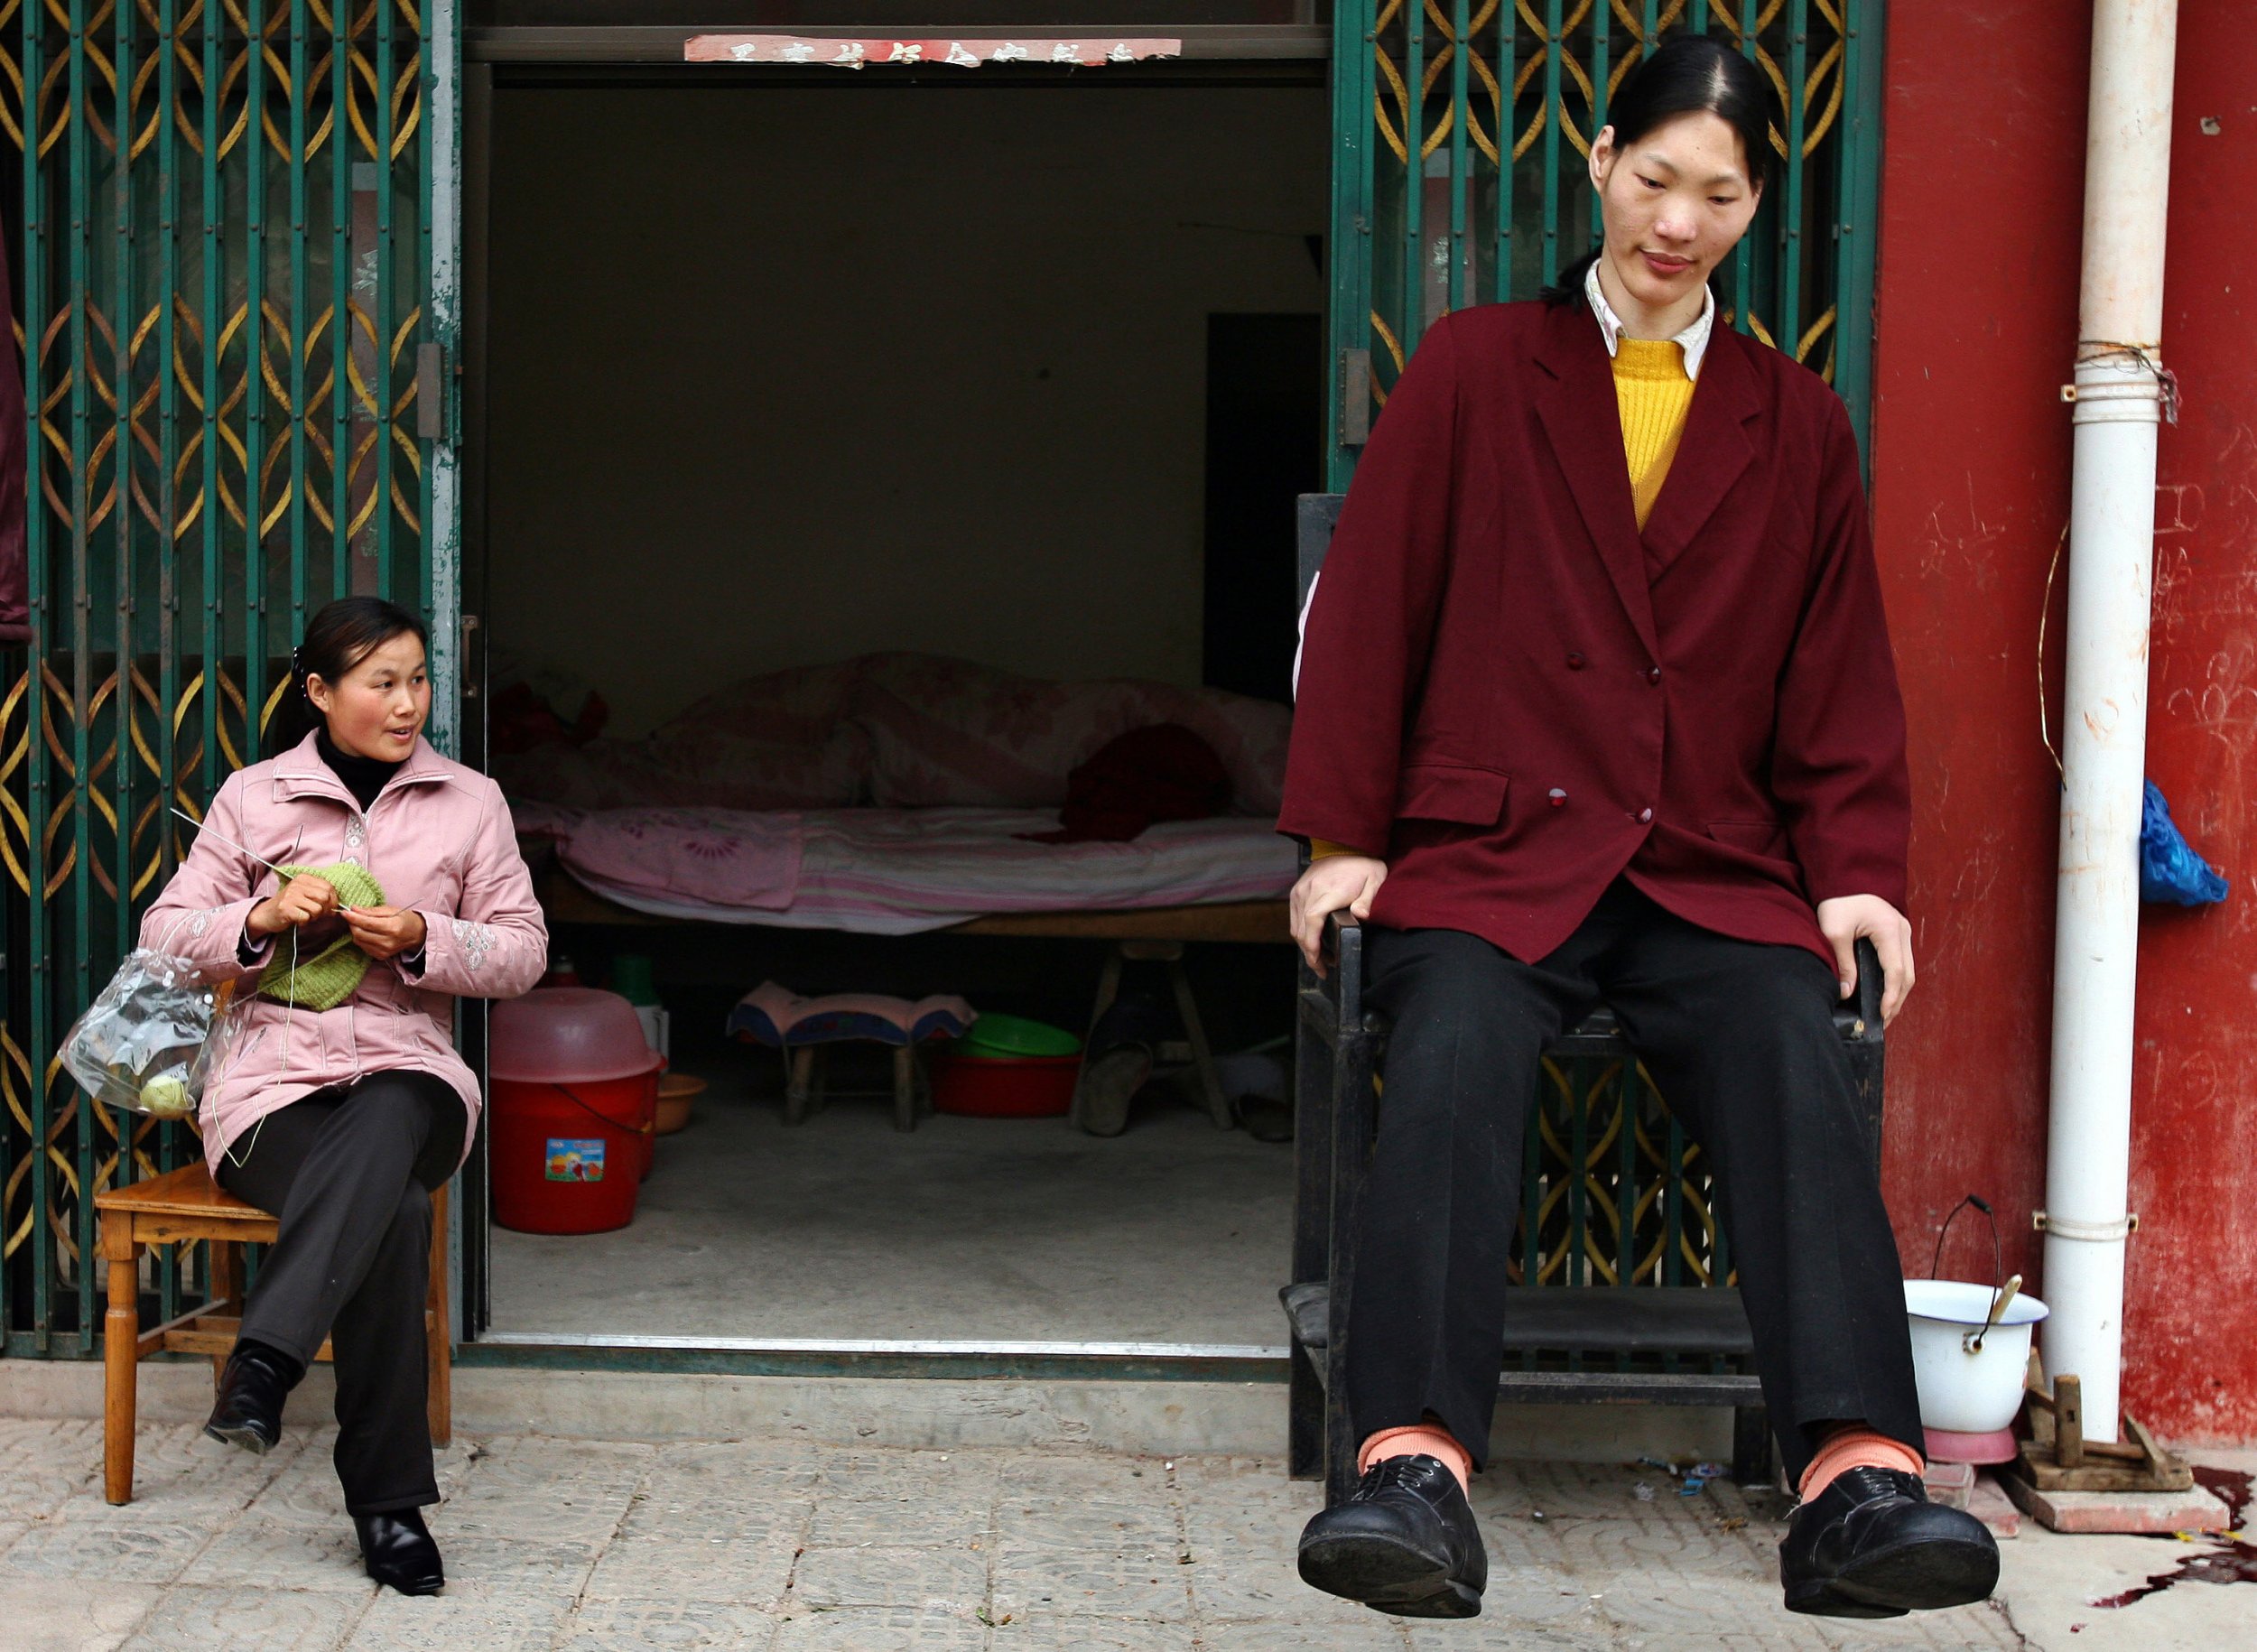 World's Tallest Woman Dies: 7'8 Yao Defen Of China Dead At 39 [PHOTOS]